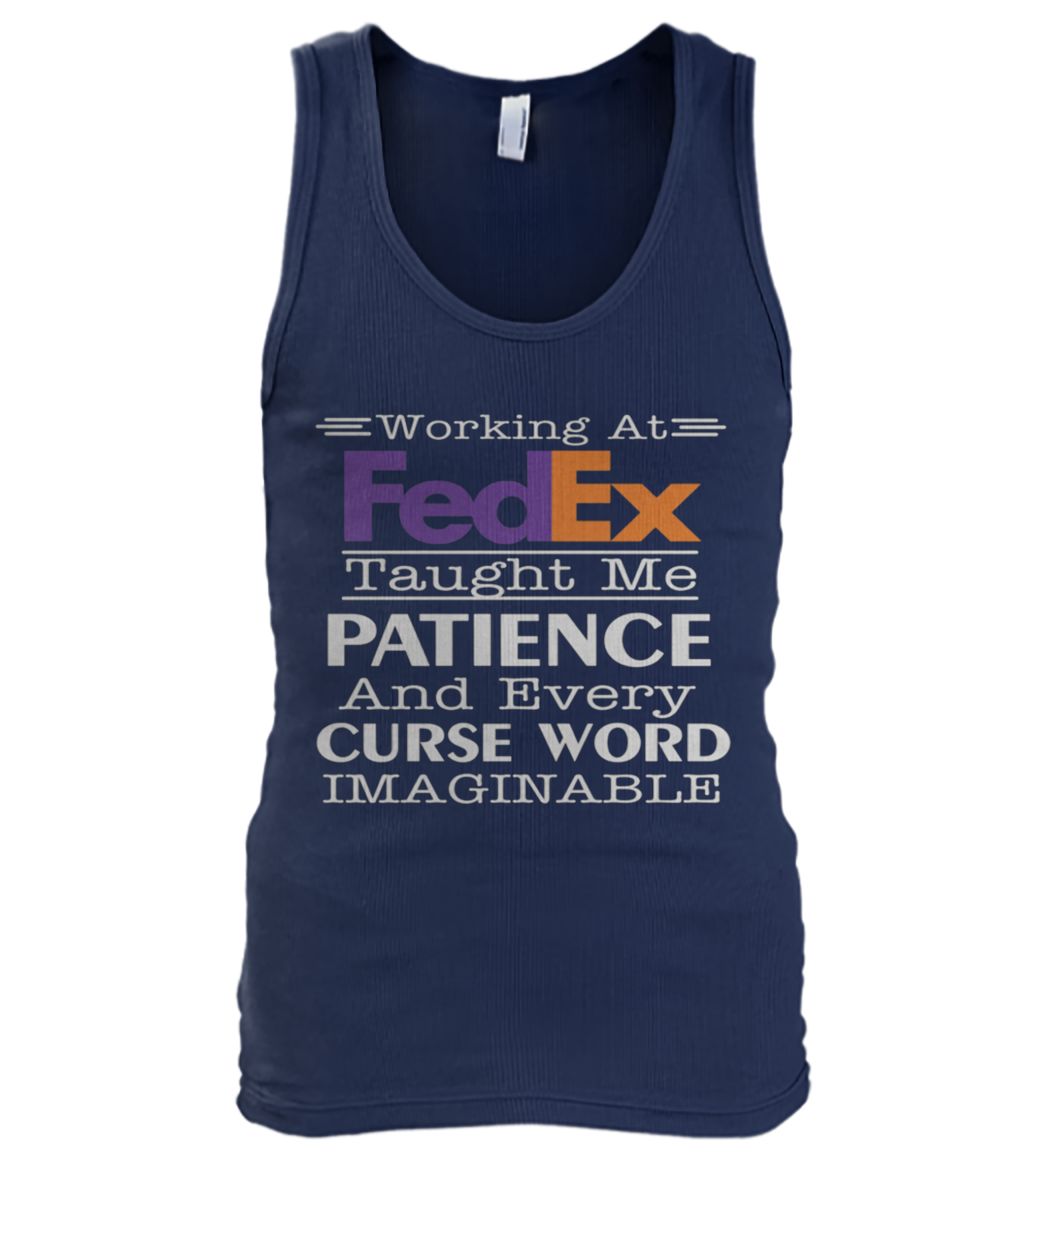 Working at fedex taught me patience and every curse word imaginable men's tank top